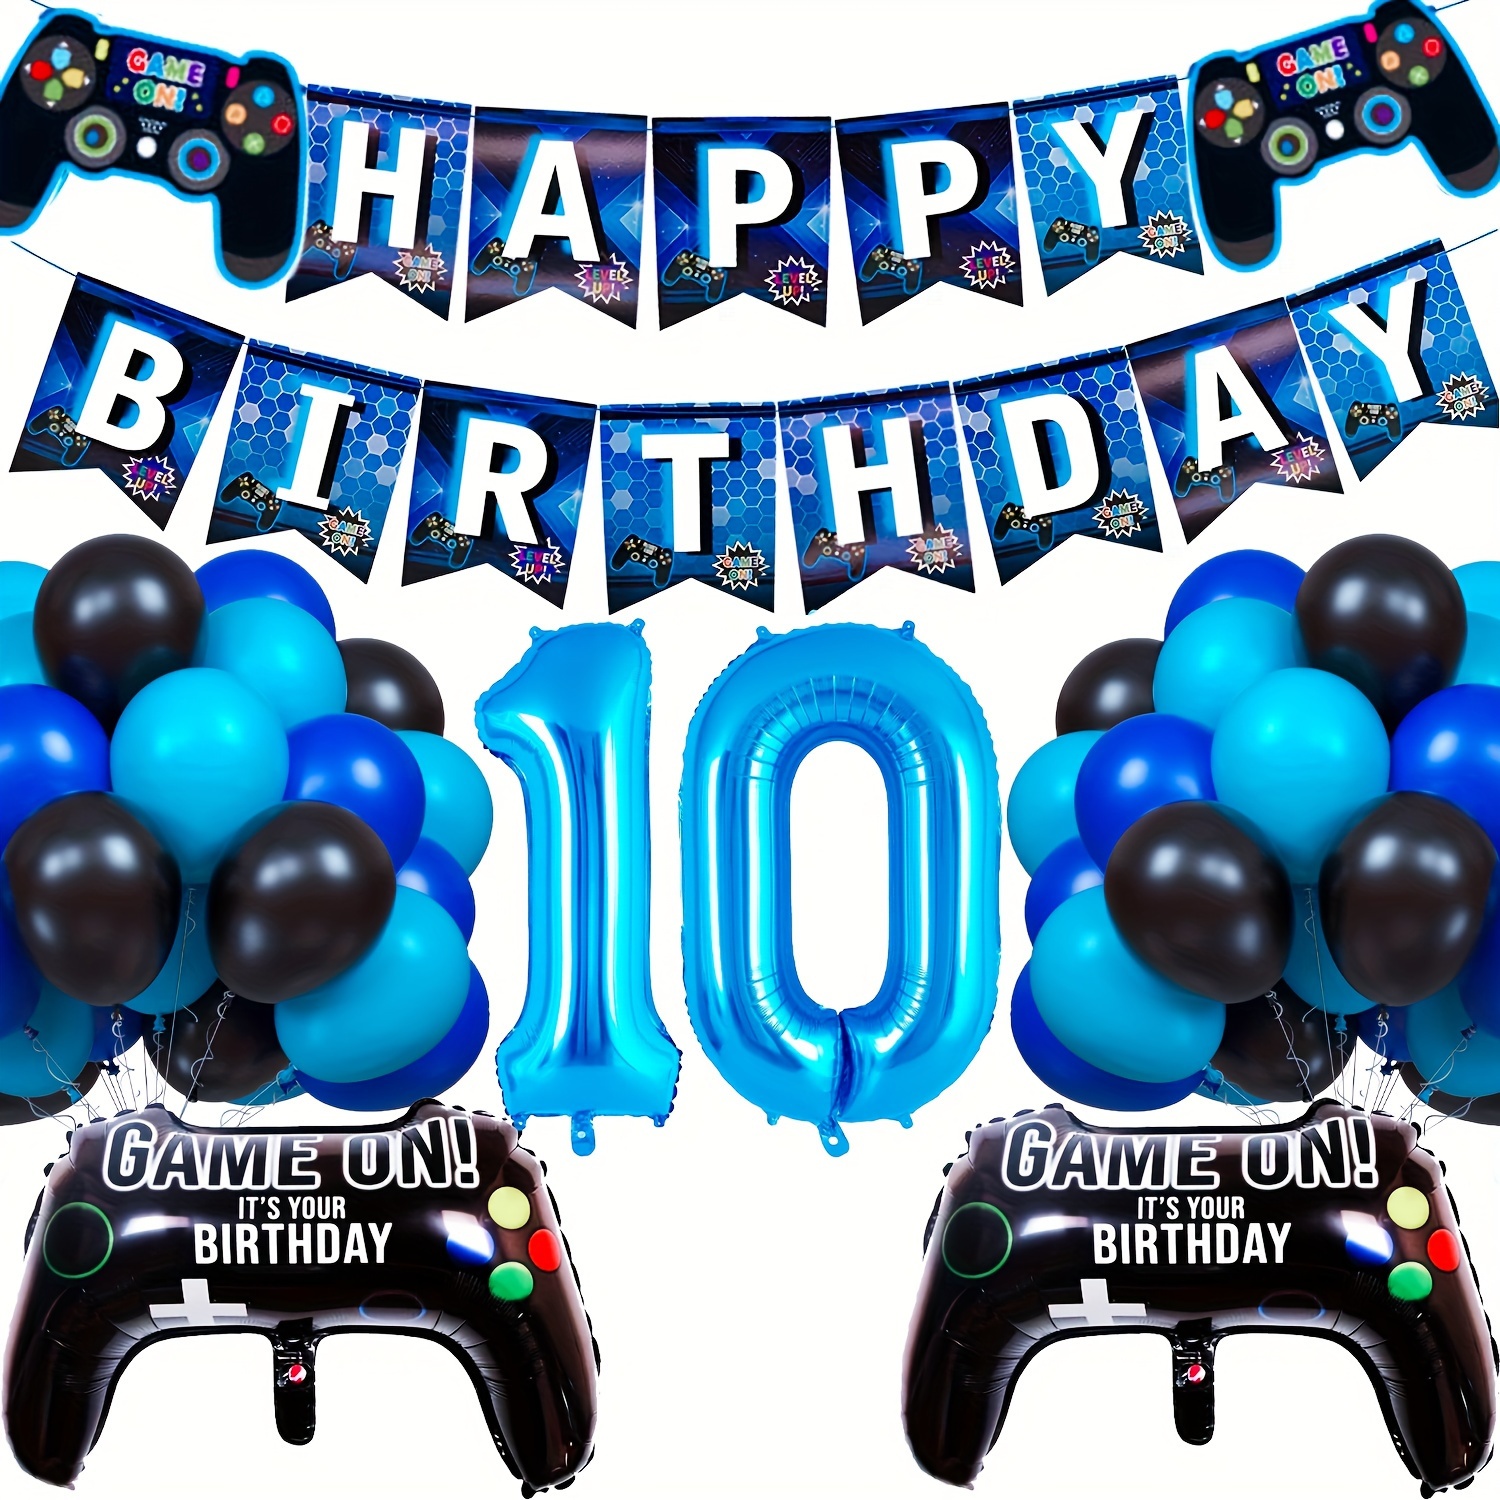 

Gamepad-themed Birthday Party Kit - Includes Happy Birthday Banner, Game Number Balloons & Level Up Pull Flag Set For Gamers - Blue & Black Gamer Decorations